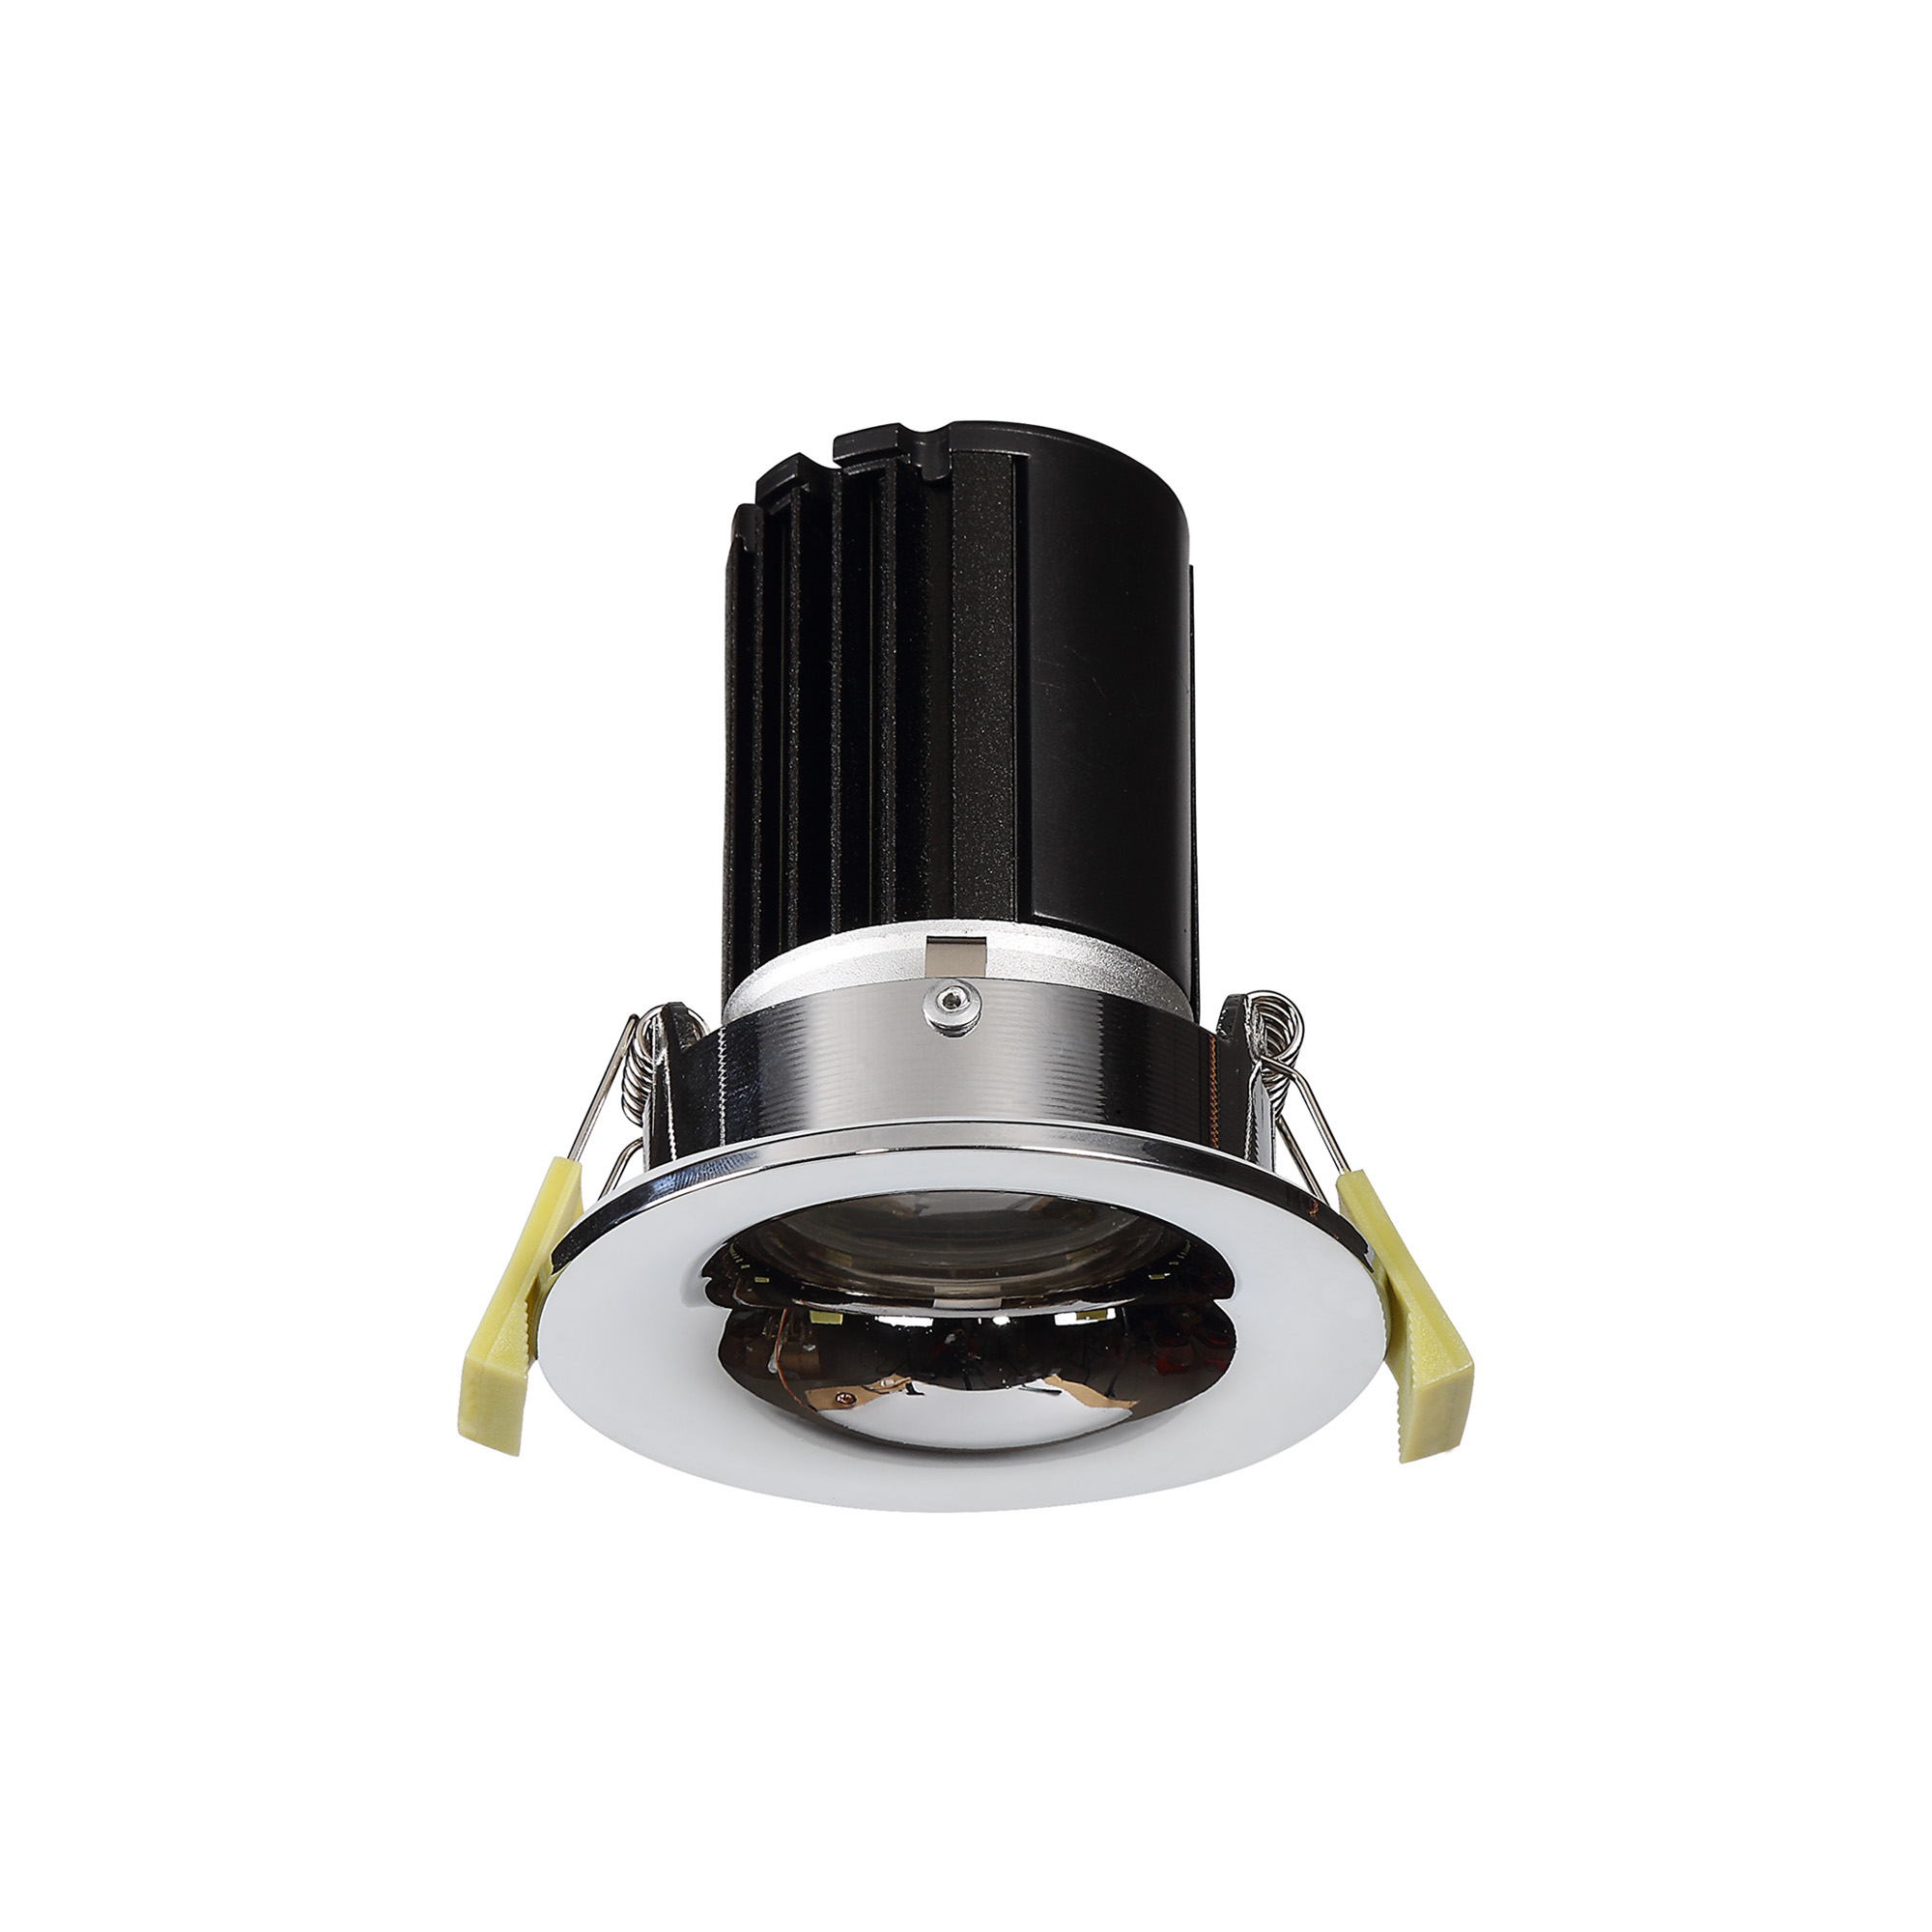 DM200772  Bruve 10 Tridonic powered 10W 2700K 750lm 12° CRI>90 LED Engine Polished Chrome Fixed Round Recessed Downlight; Inner Glass cover; IP65